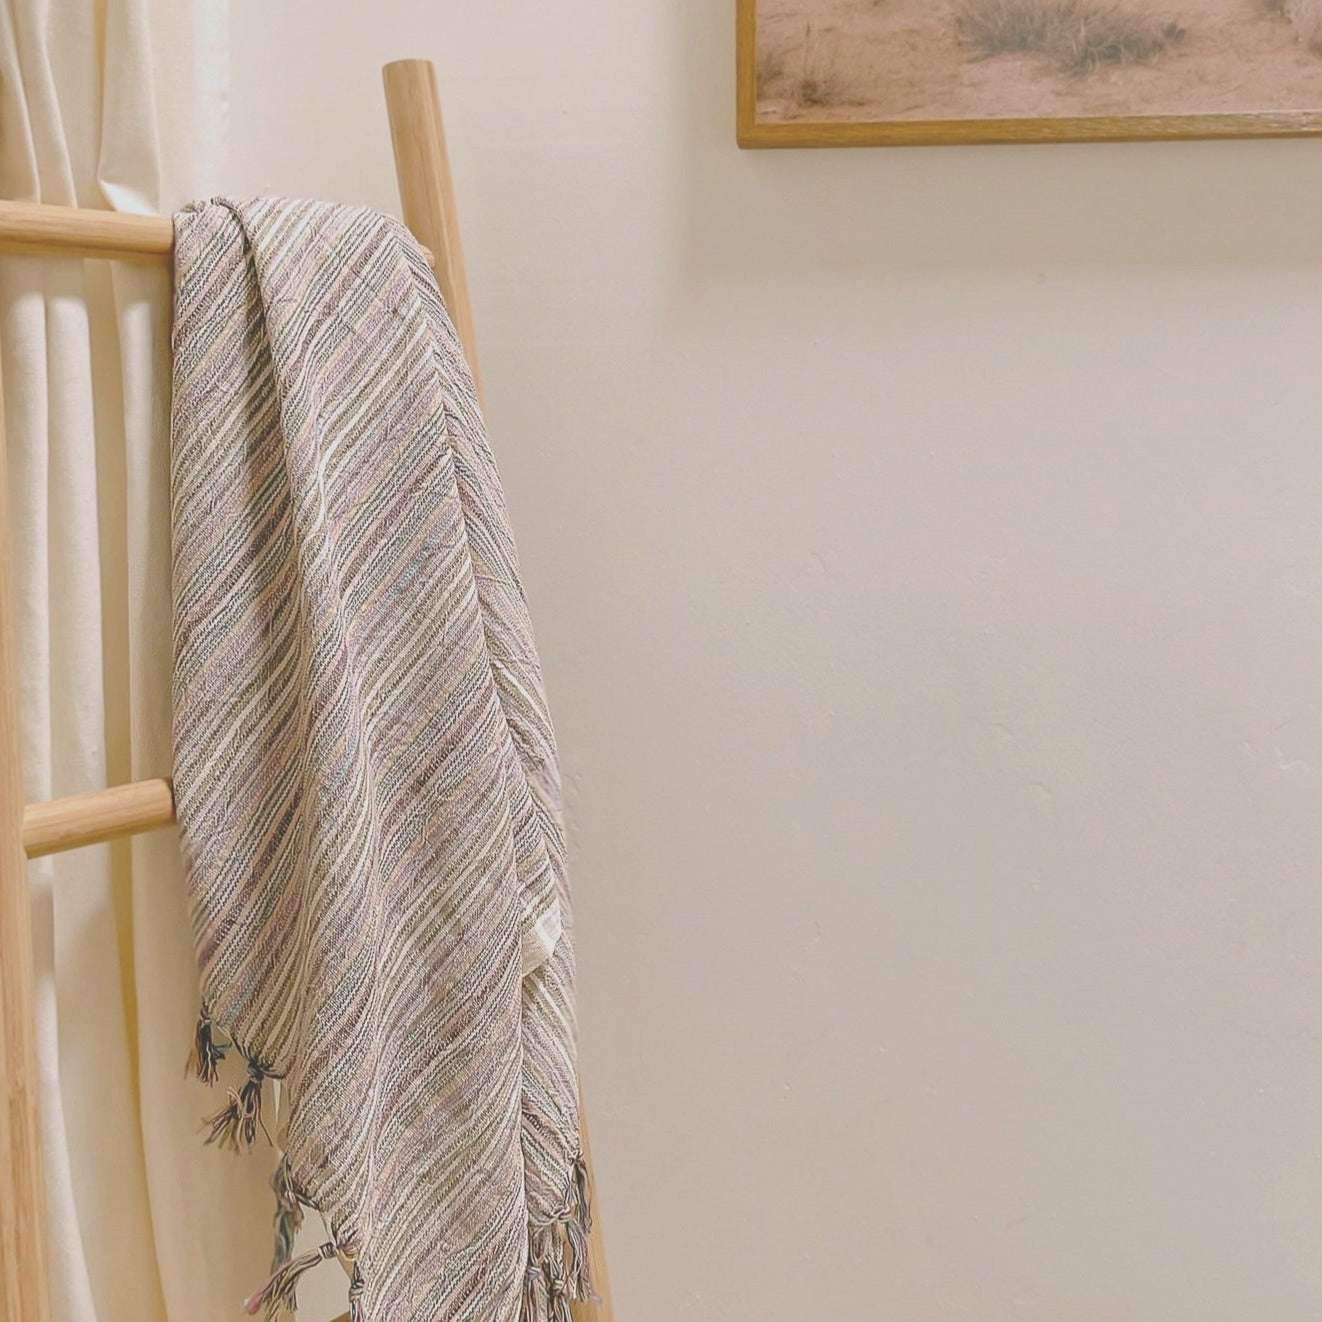 Handwoven Turkish towel as a decorative accent. 